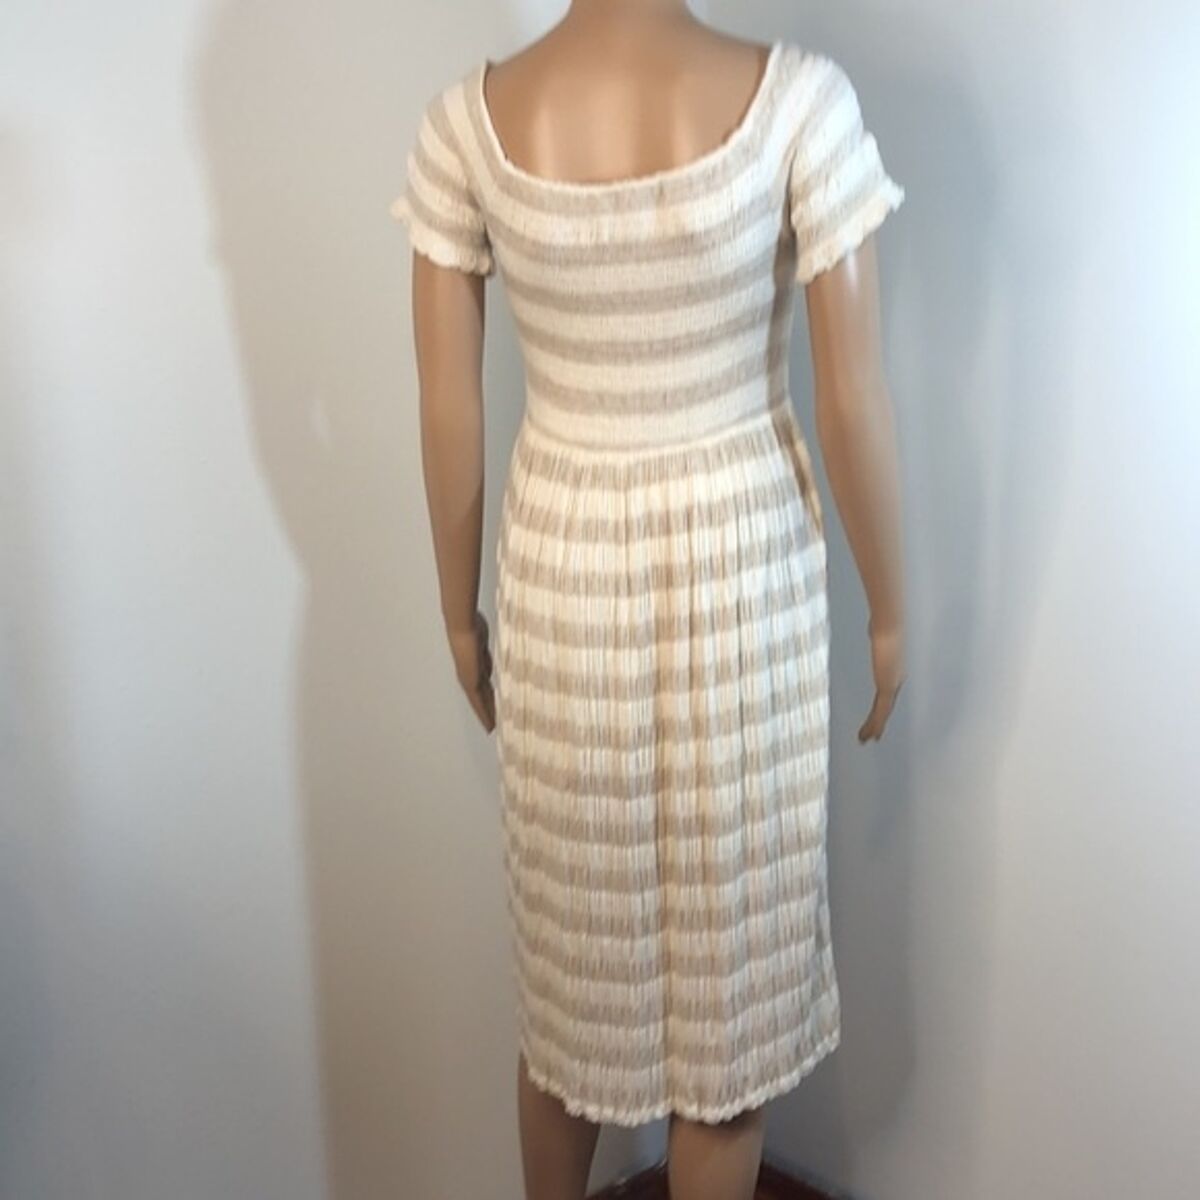 Lucky Brand dress size medium ruched elastic top tan and white striped top.